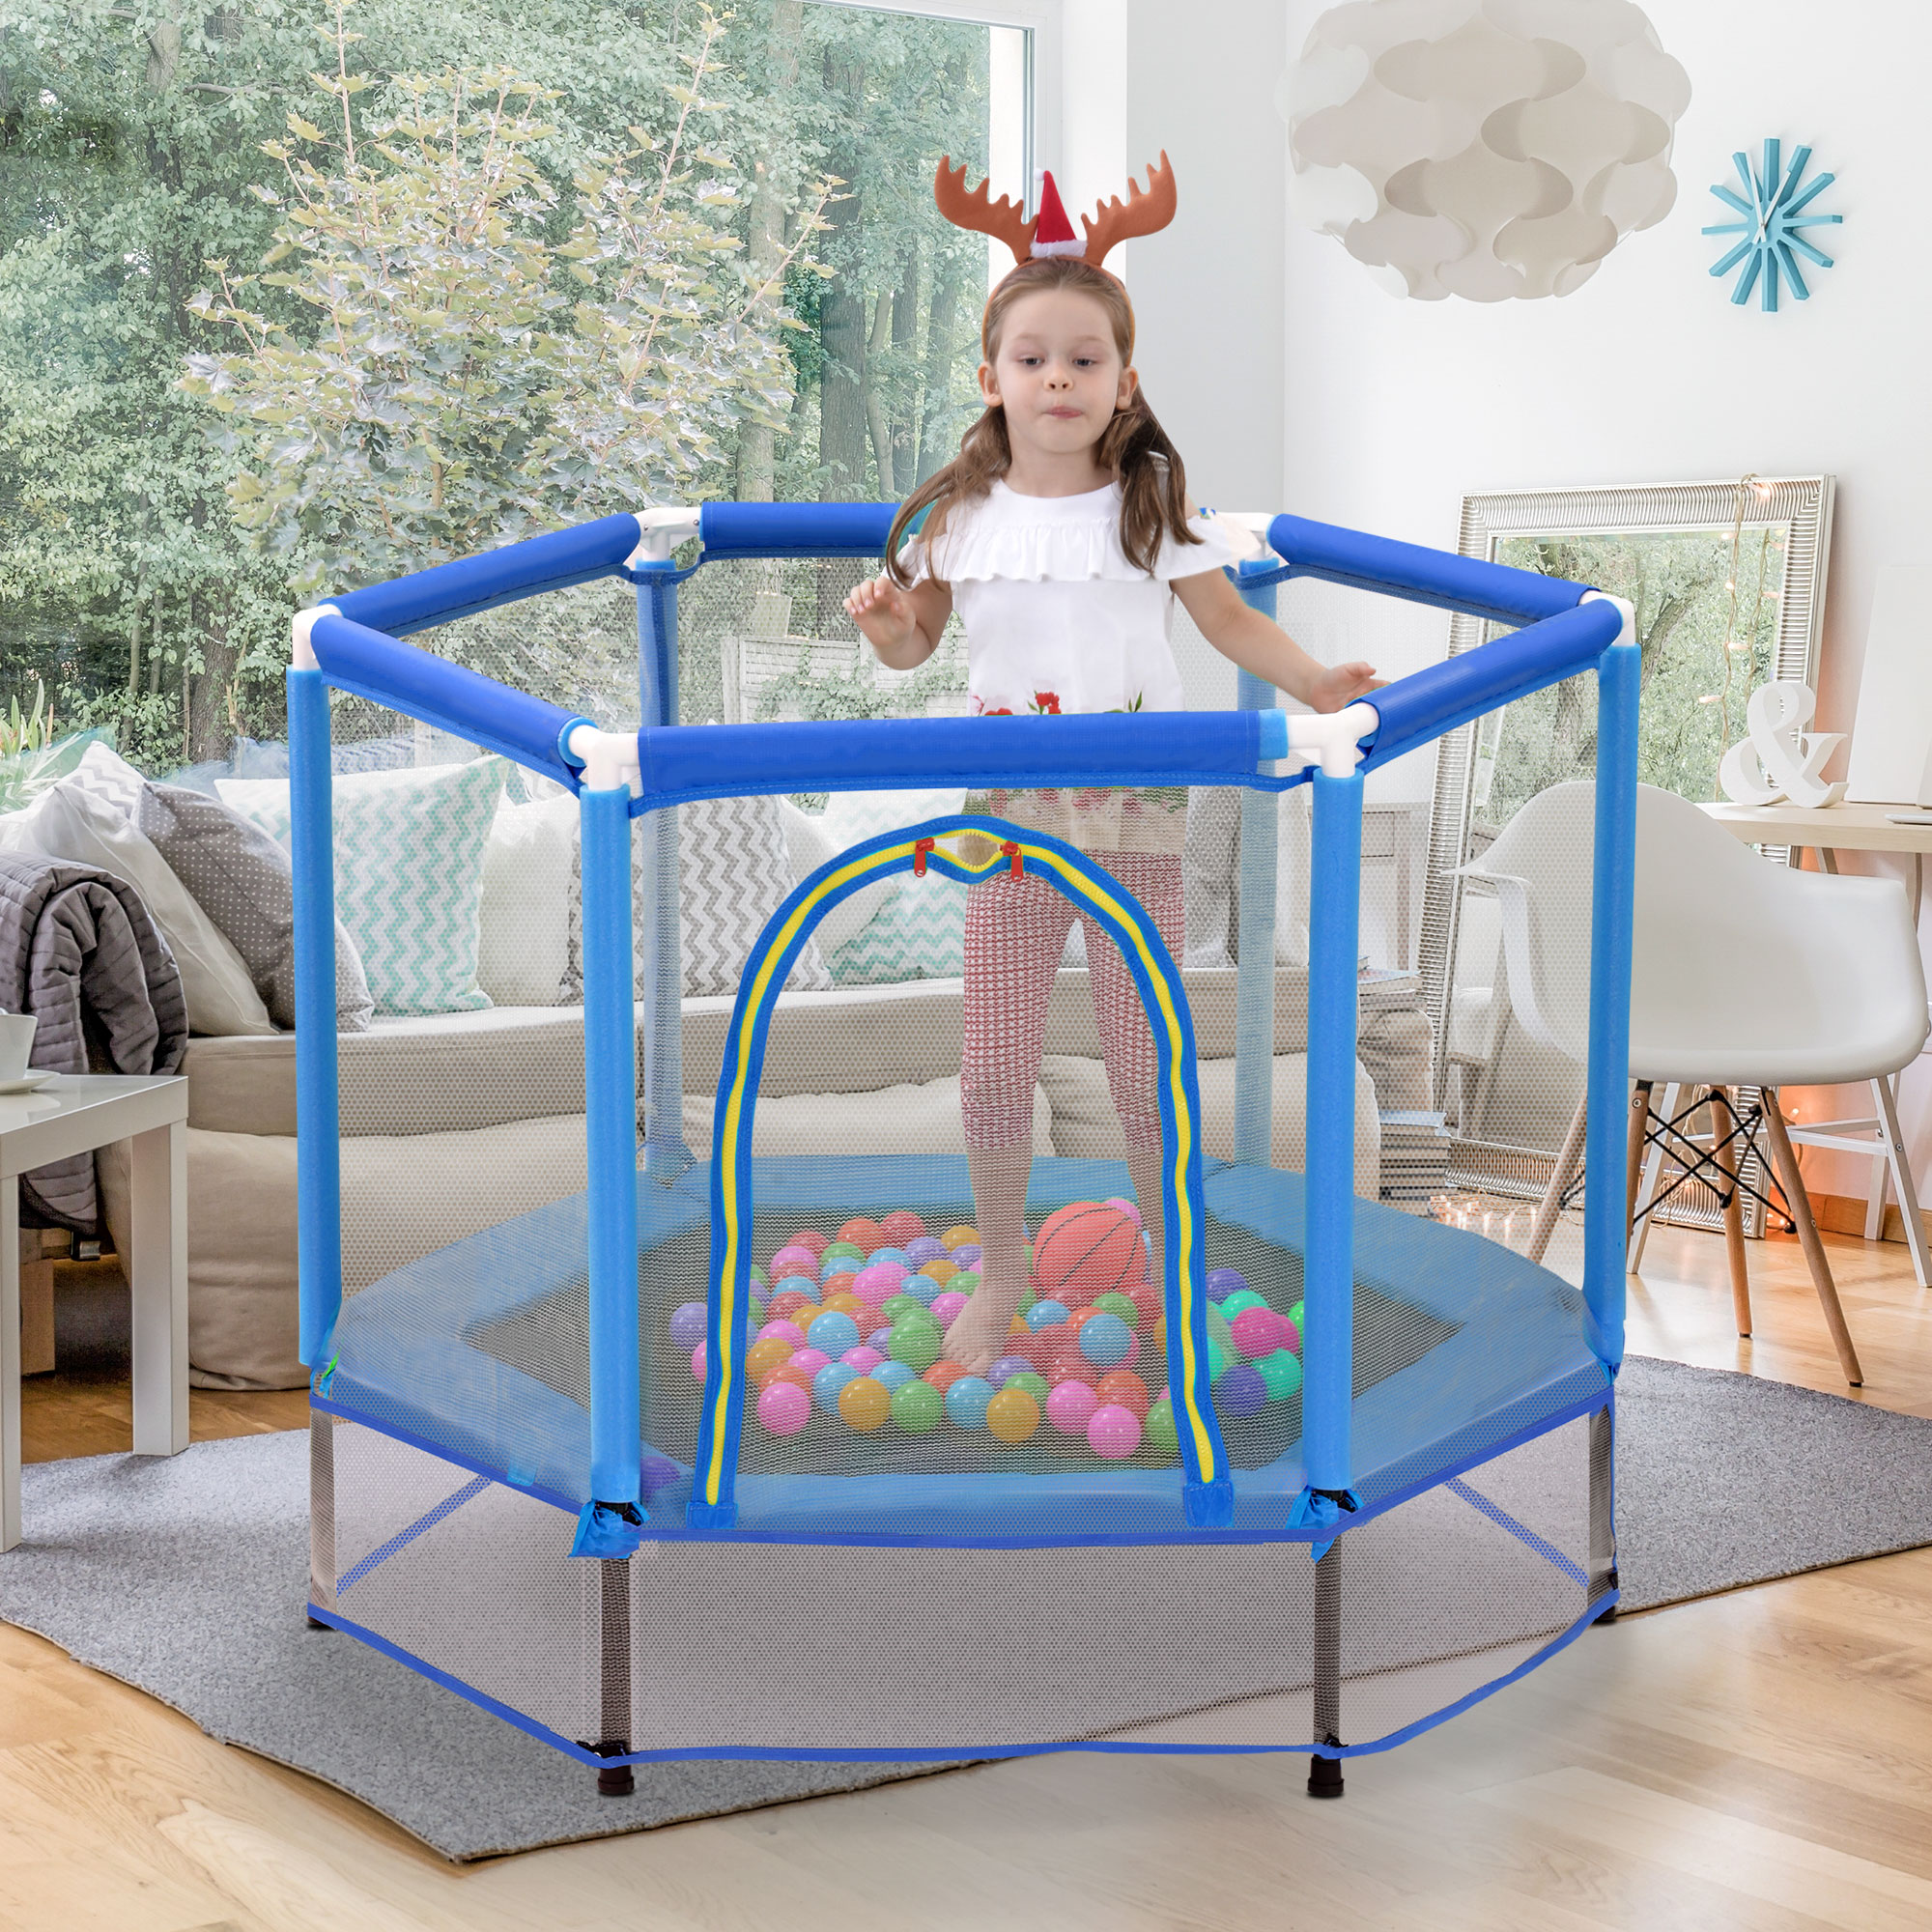 55&rdquo; Toddlers Trampoline with Safety Enclosure Net and Balls, Indoor Outdoor Mini Trampoline for Kids-Boyel Living